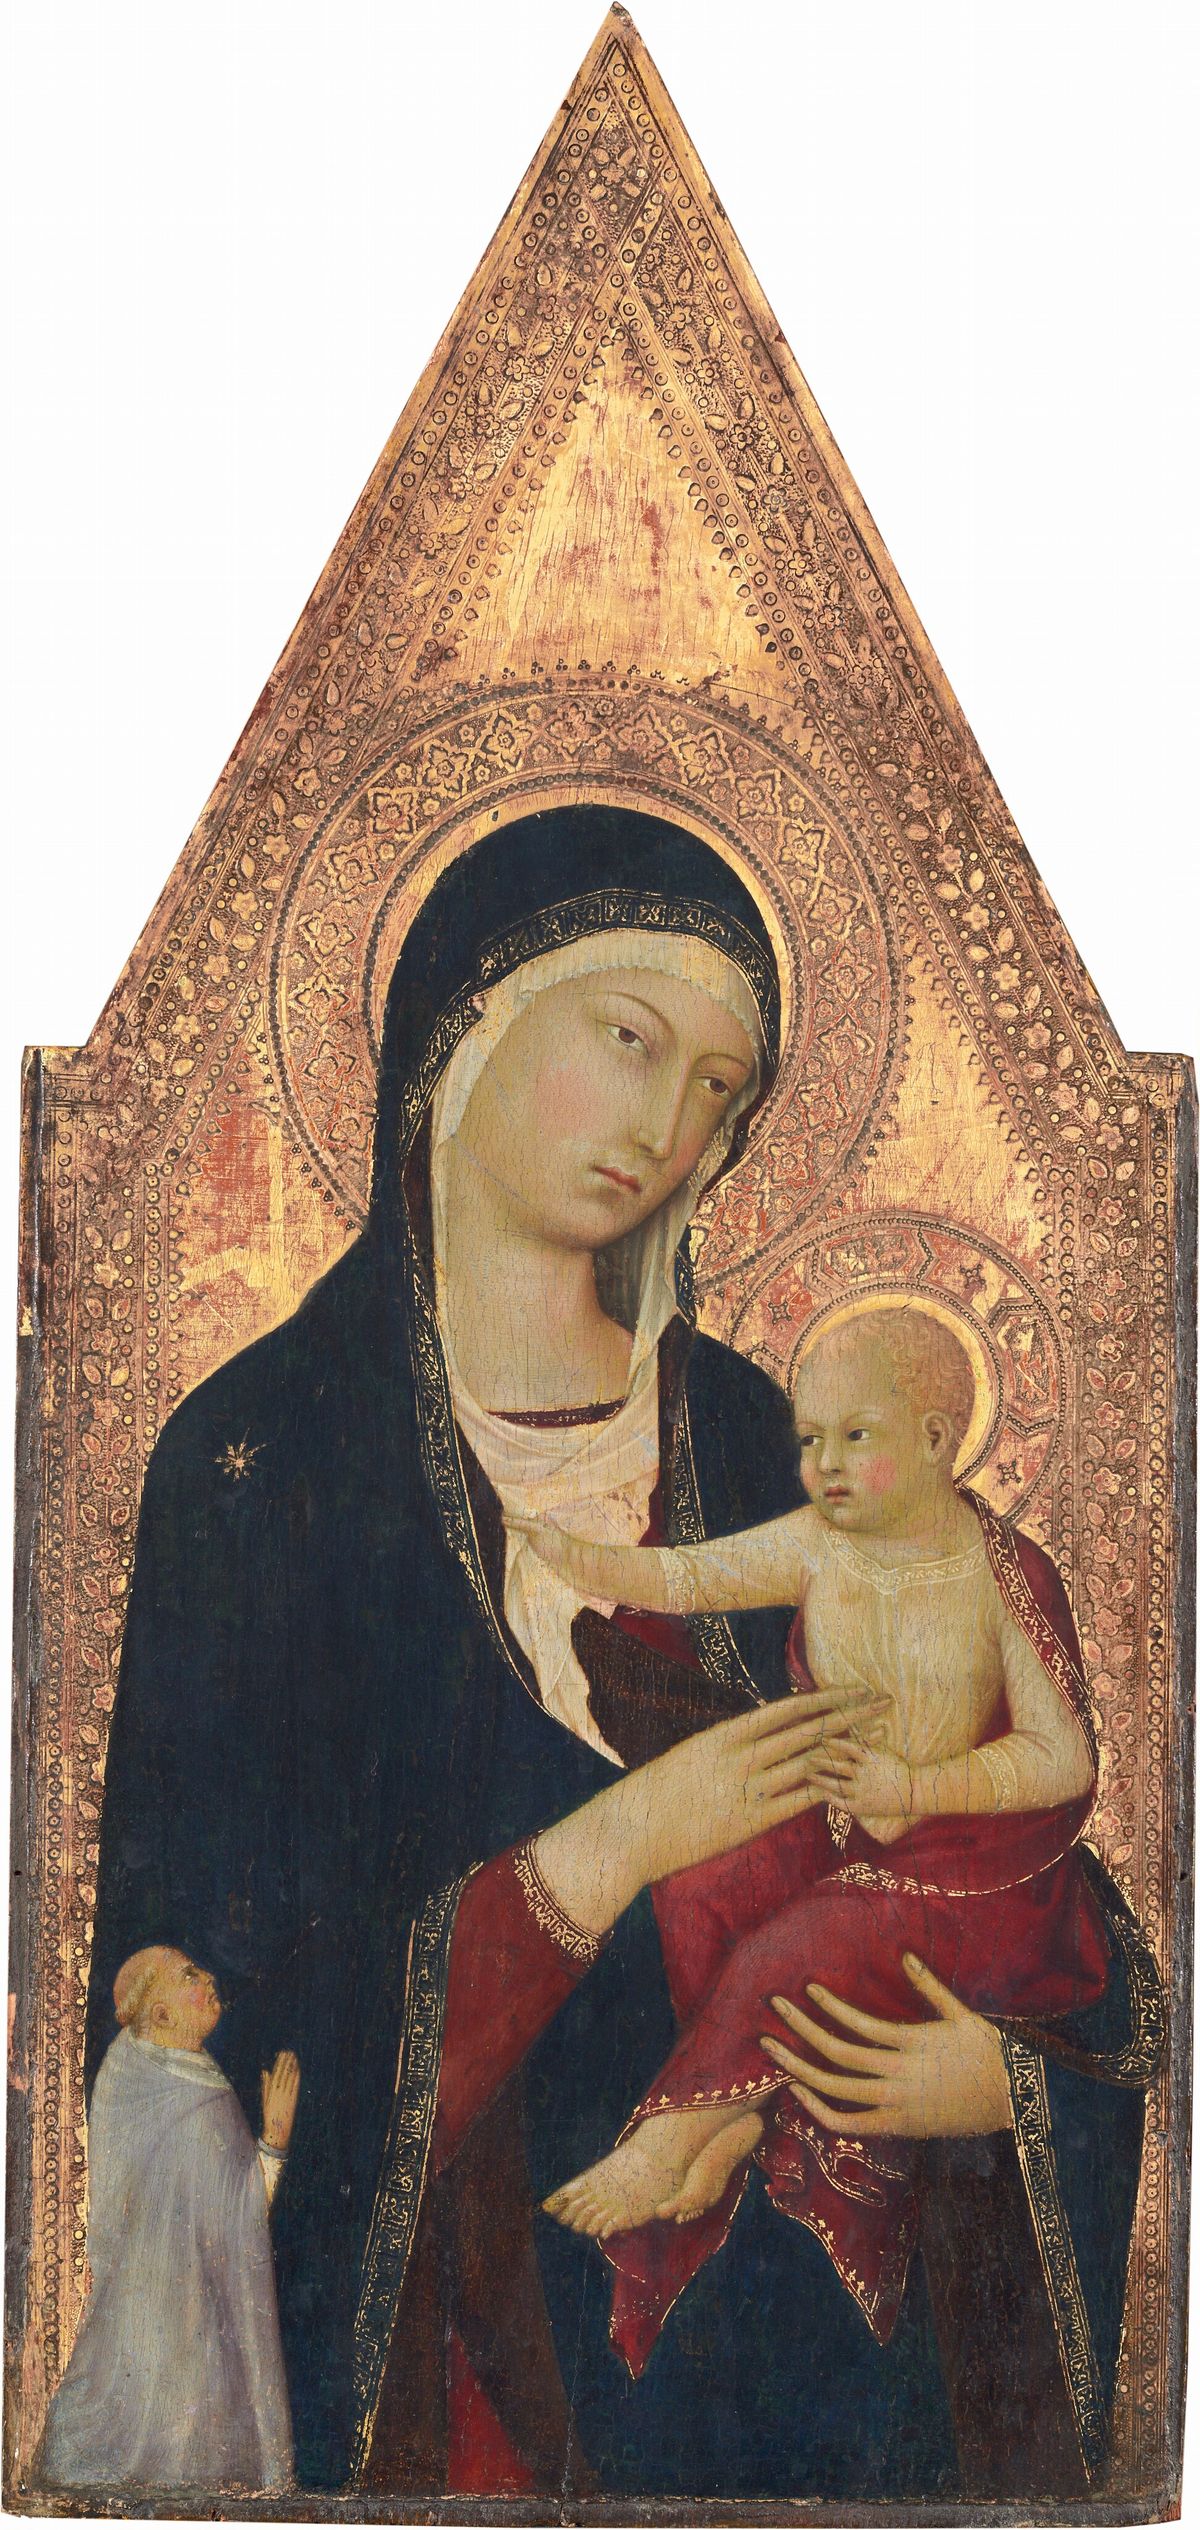 Madonna and Child with Donor by Lippo Memmi (1325-1330) - Public Domain Catholic Painting